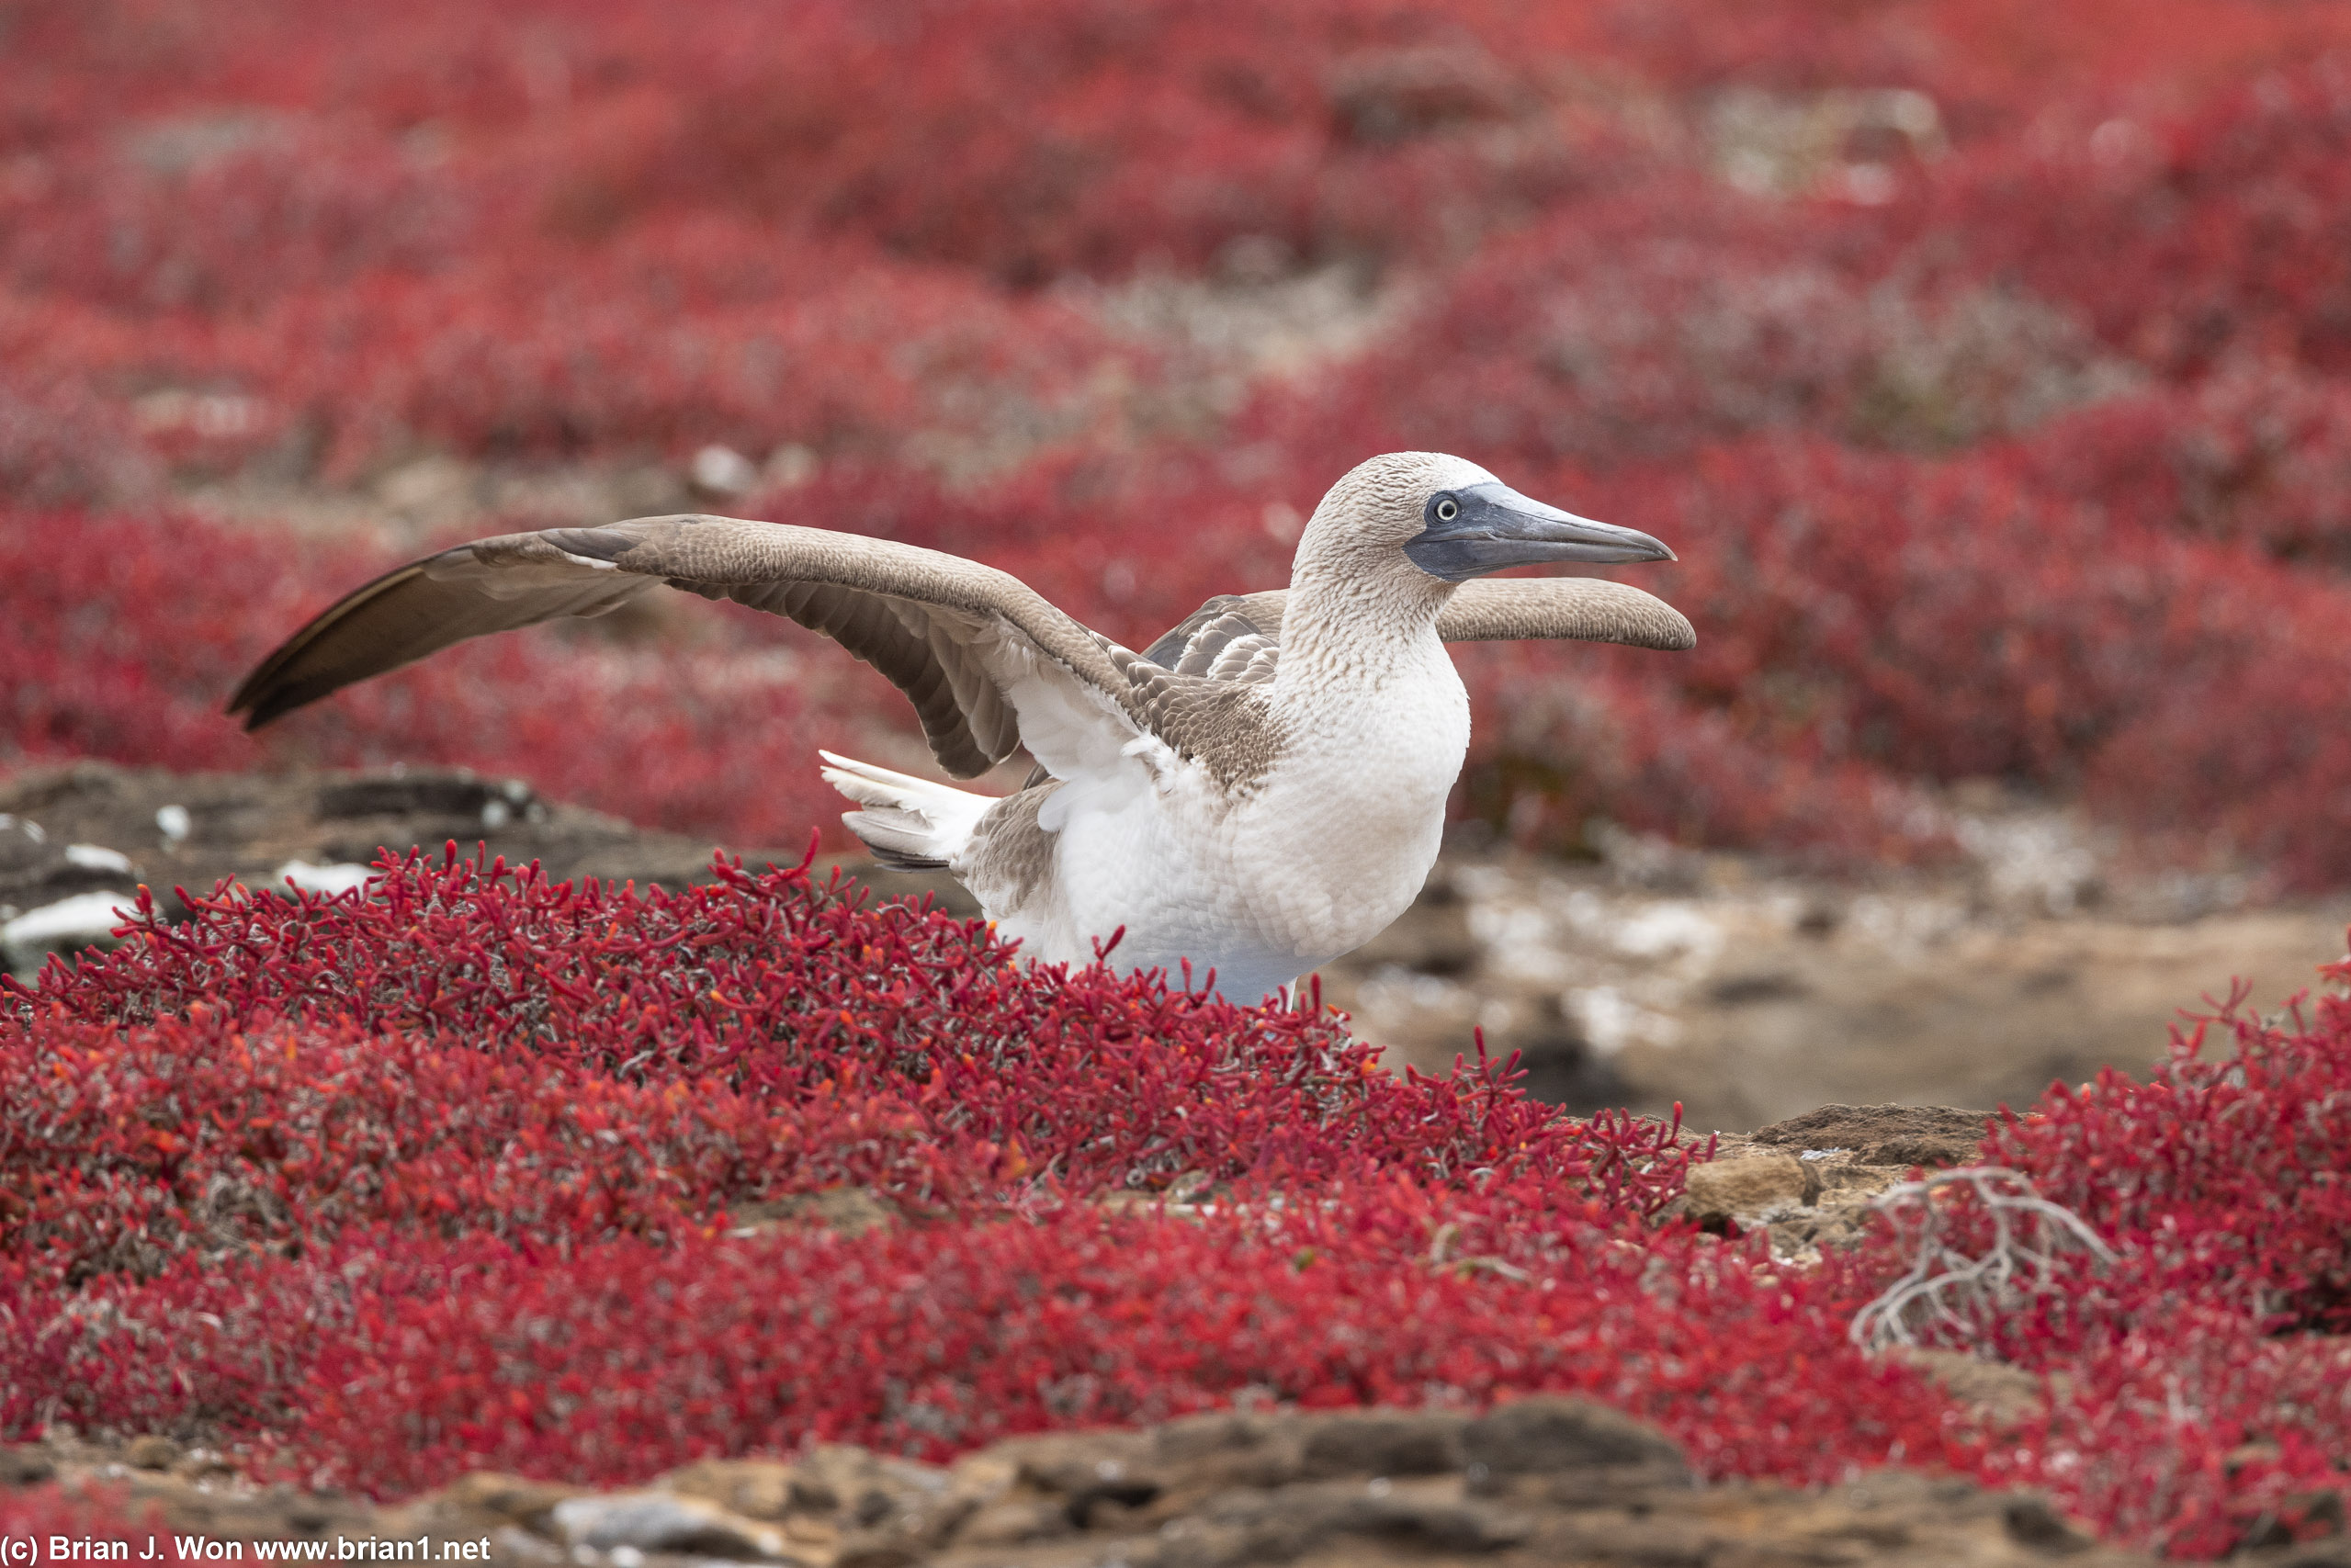 Blue-footed booby landing among the red scrub.